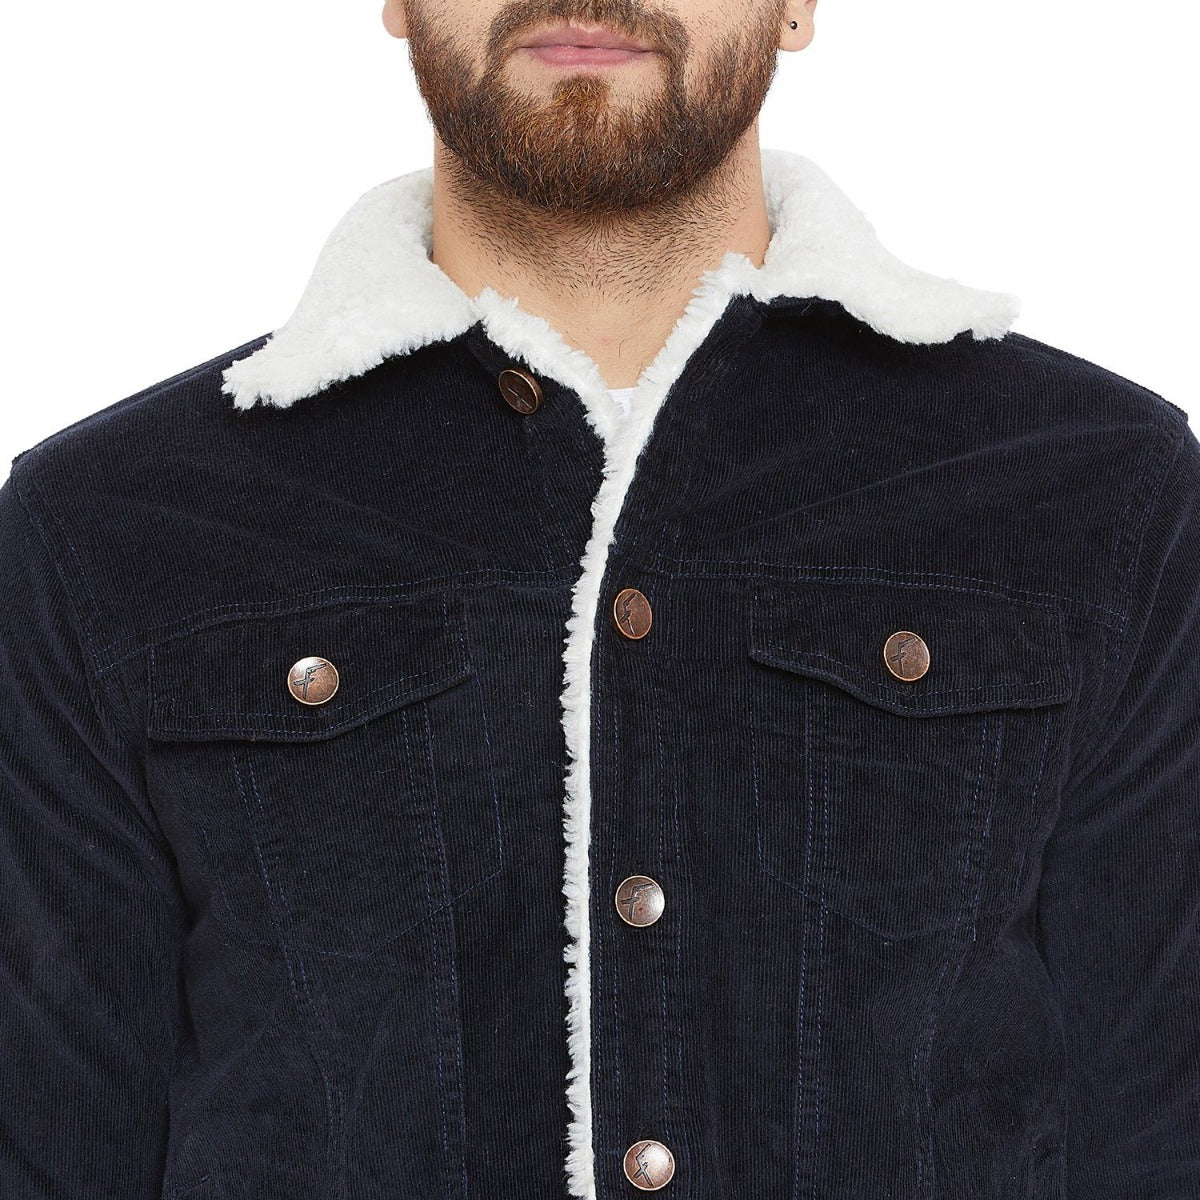 Affordable  lowest price jacket